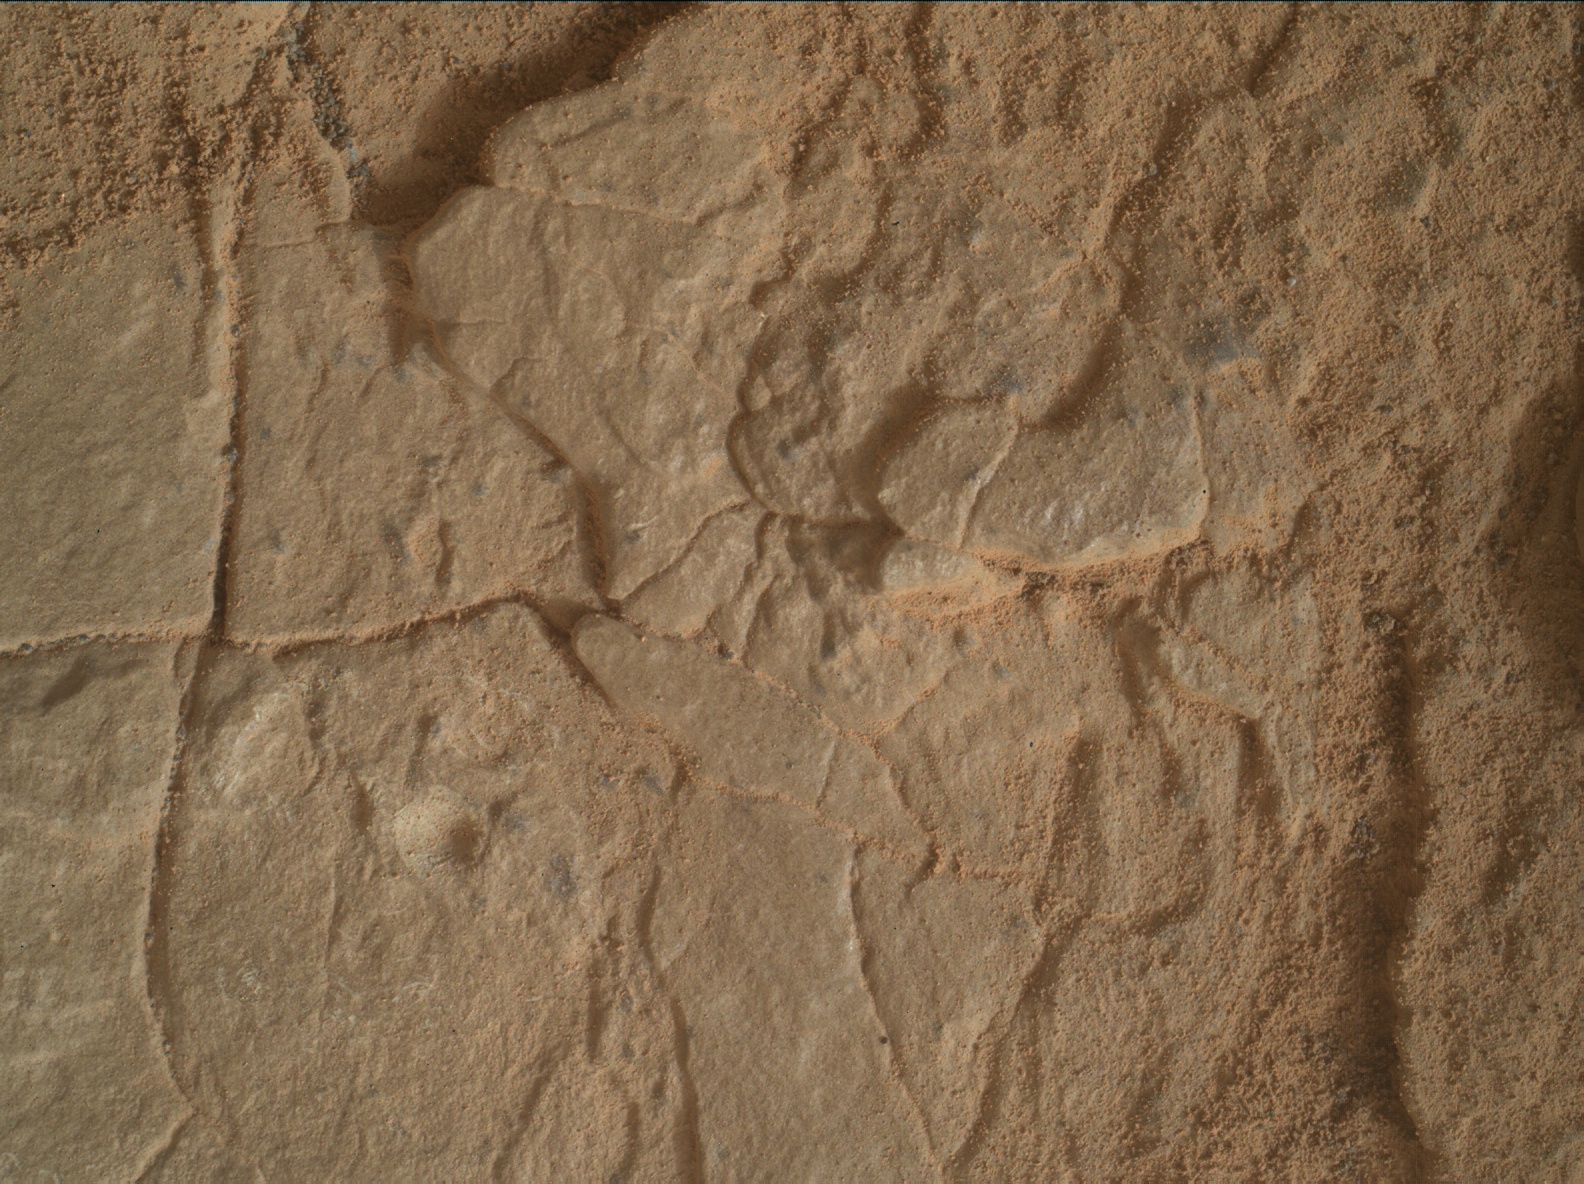 Nasa's Mars rover Curiosity acquired this image using its Mars Hand Lens Imager (MAHLI) on Sol 2826